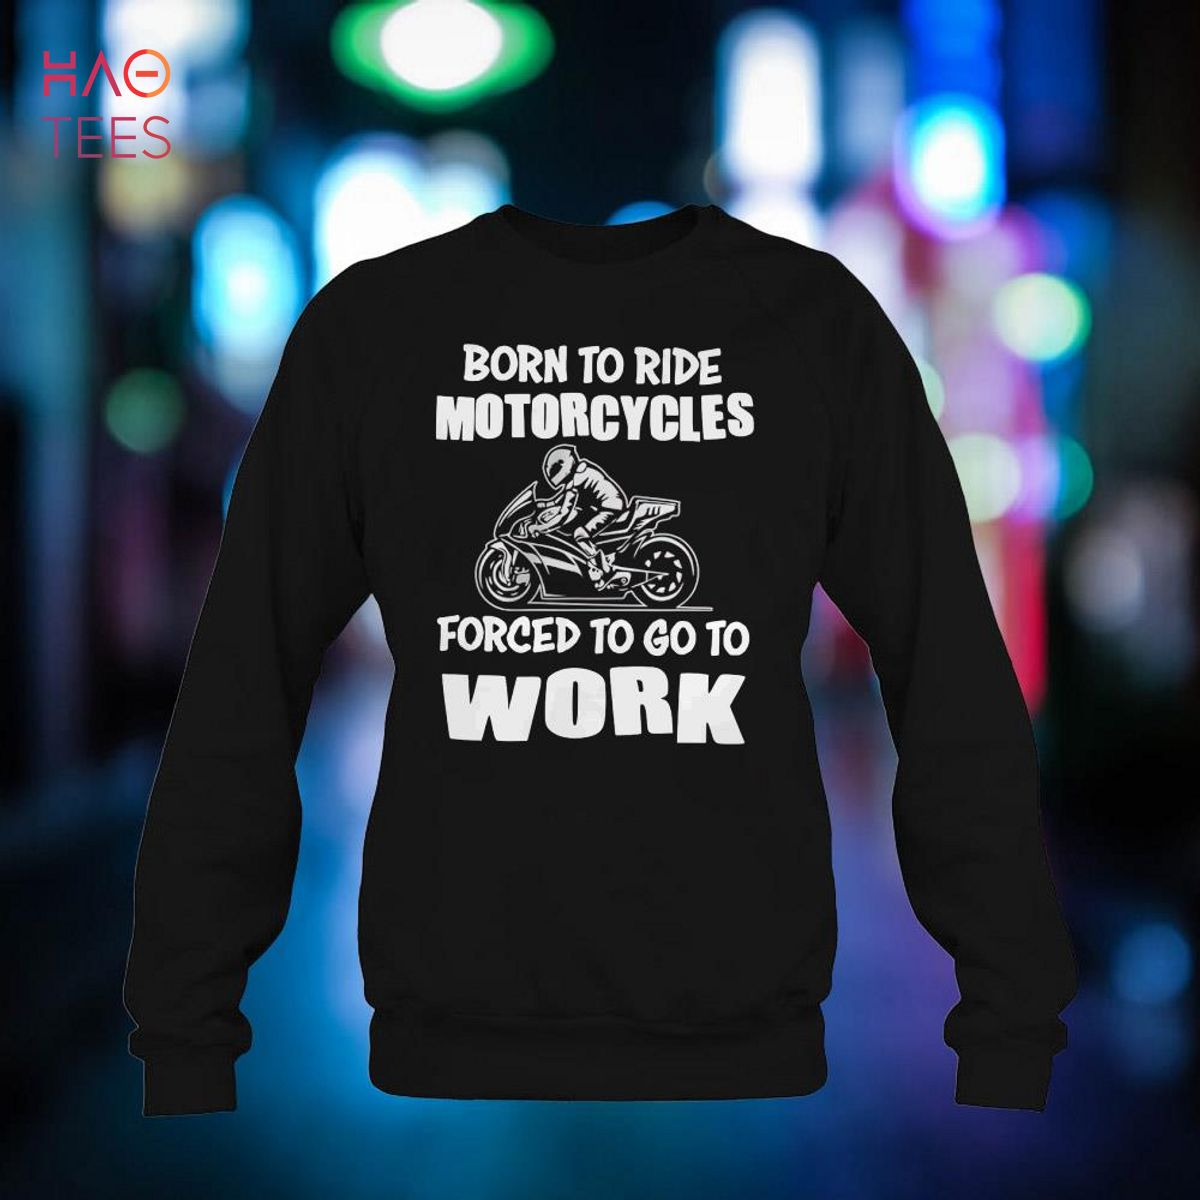 Born To Ride – Forced To Work T-Shirt